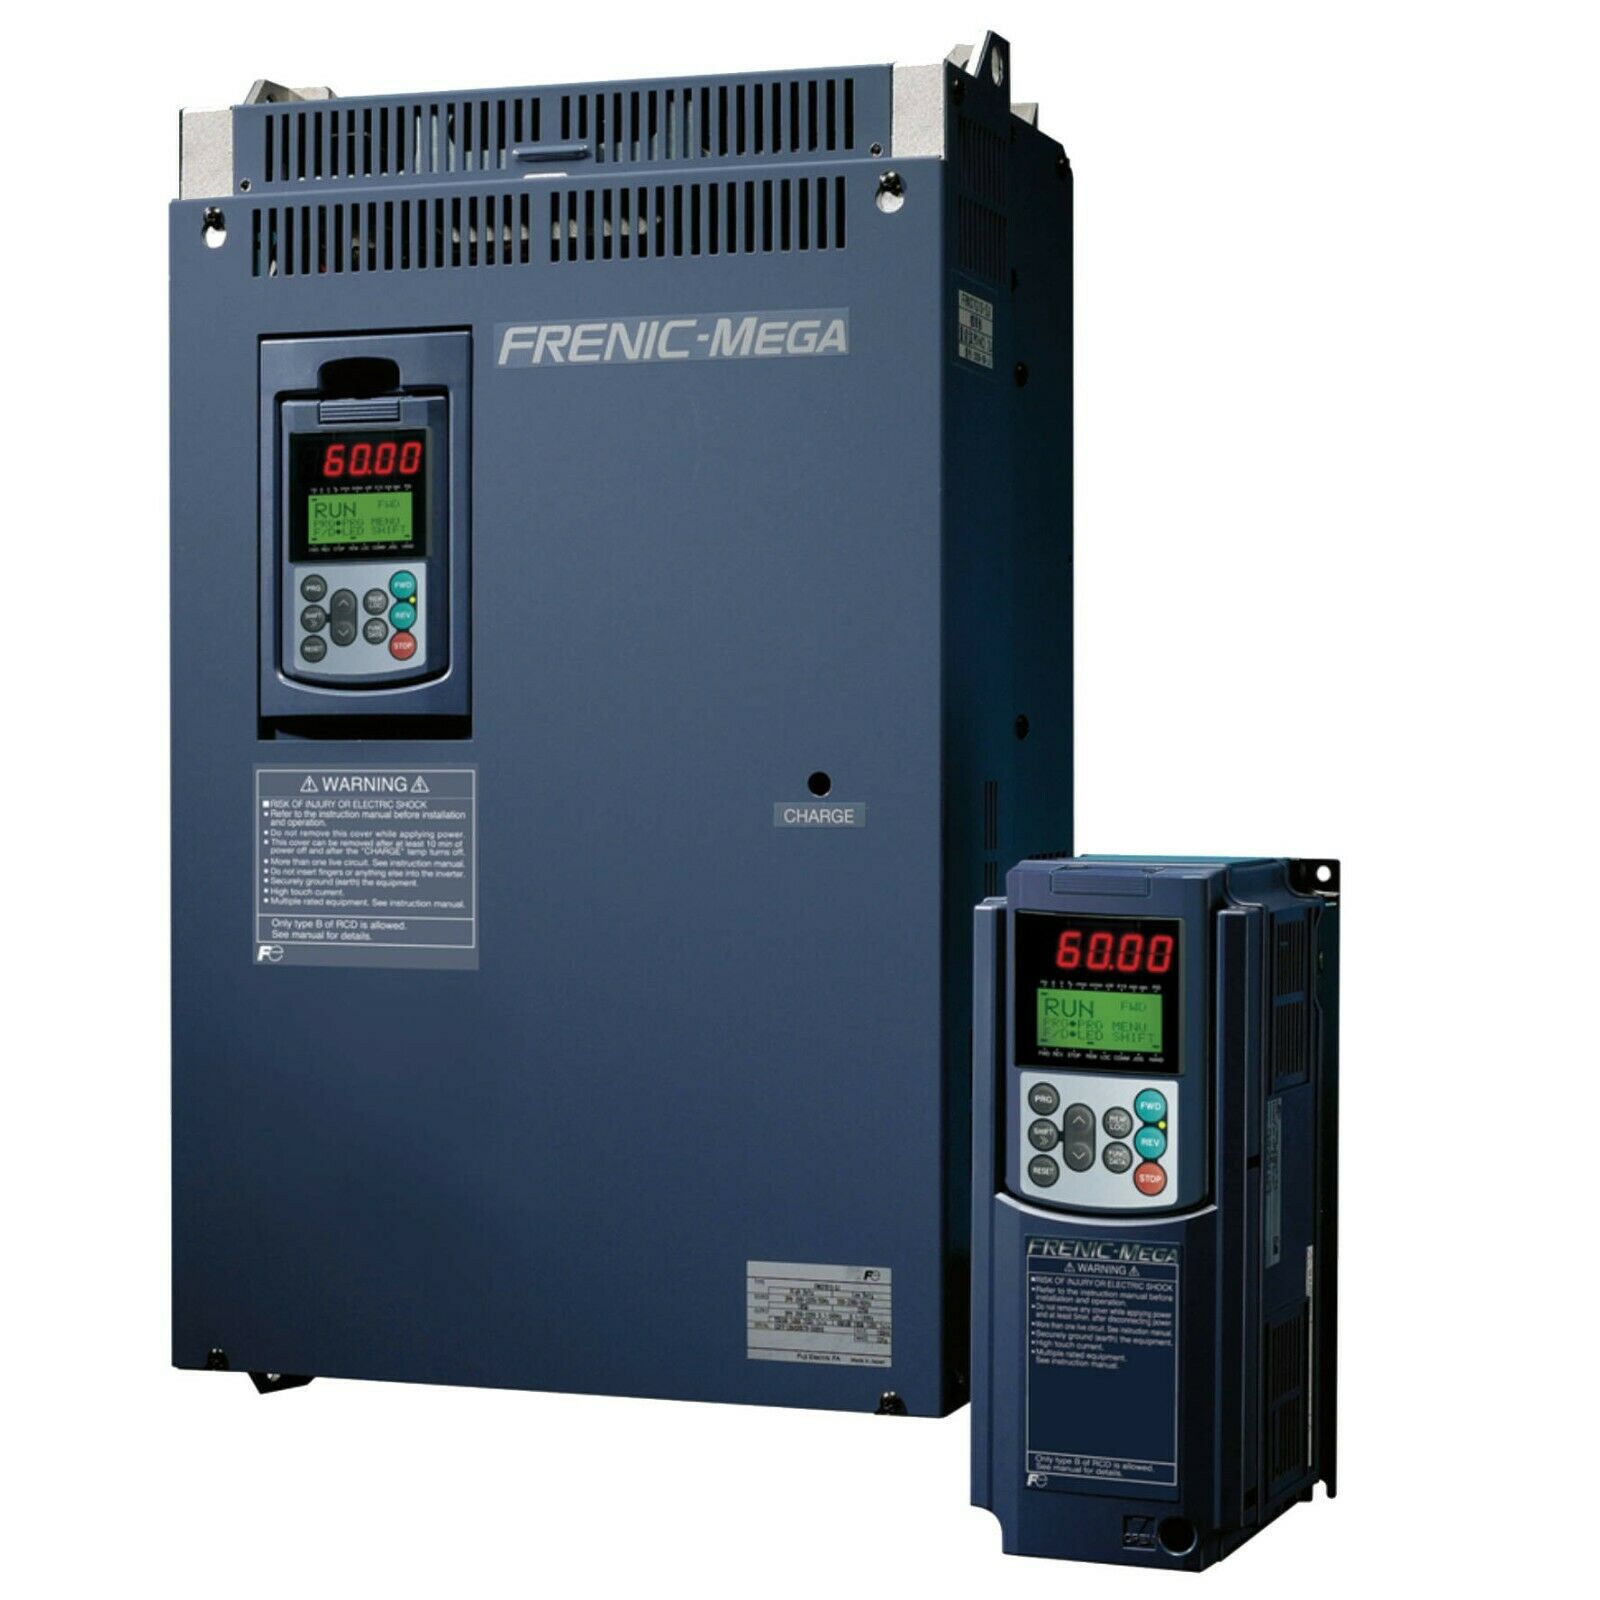 Fuji Variable frequency drives